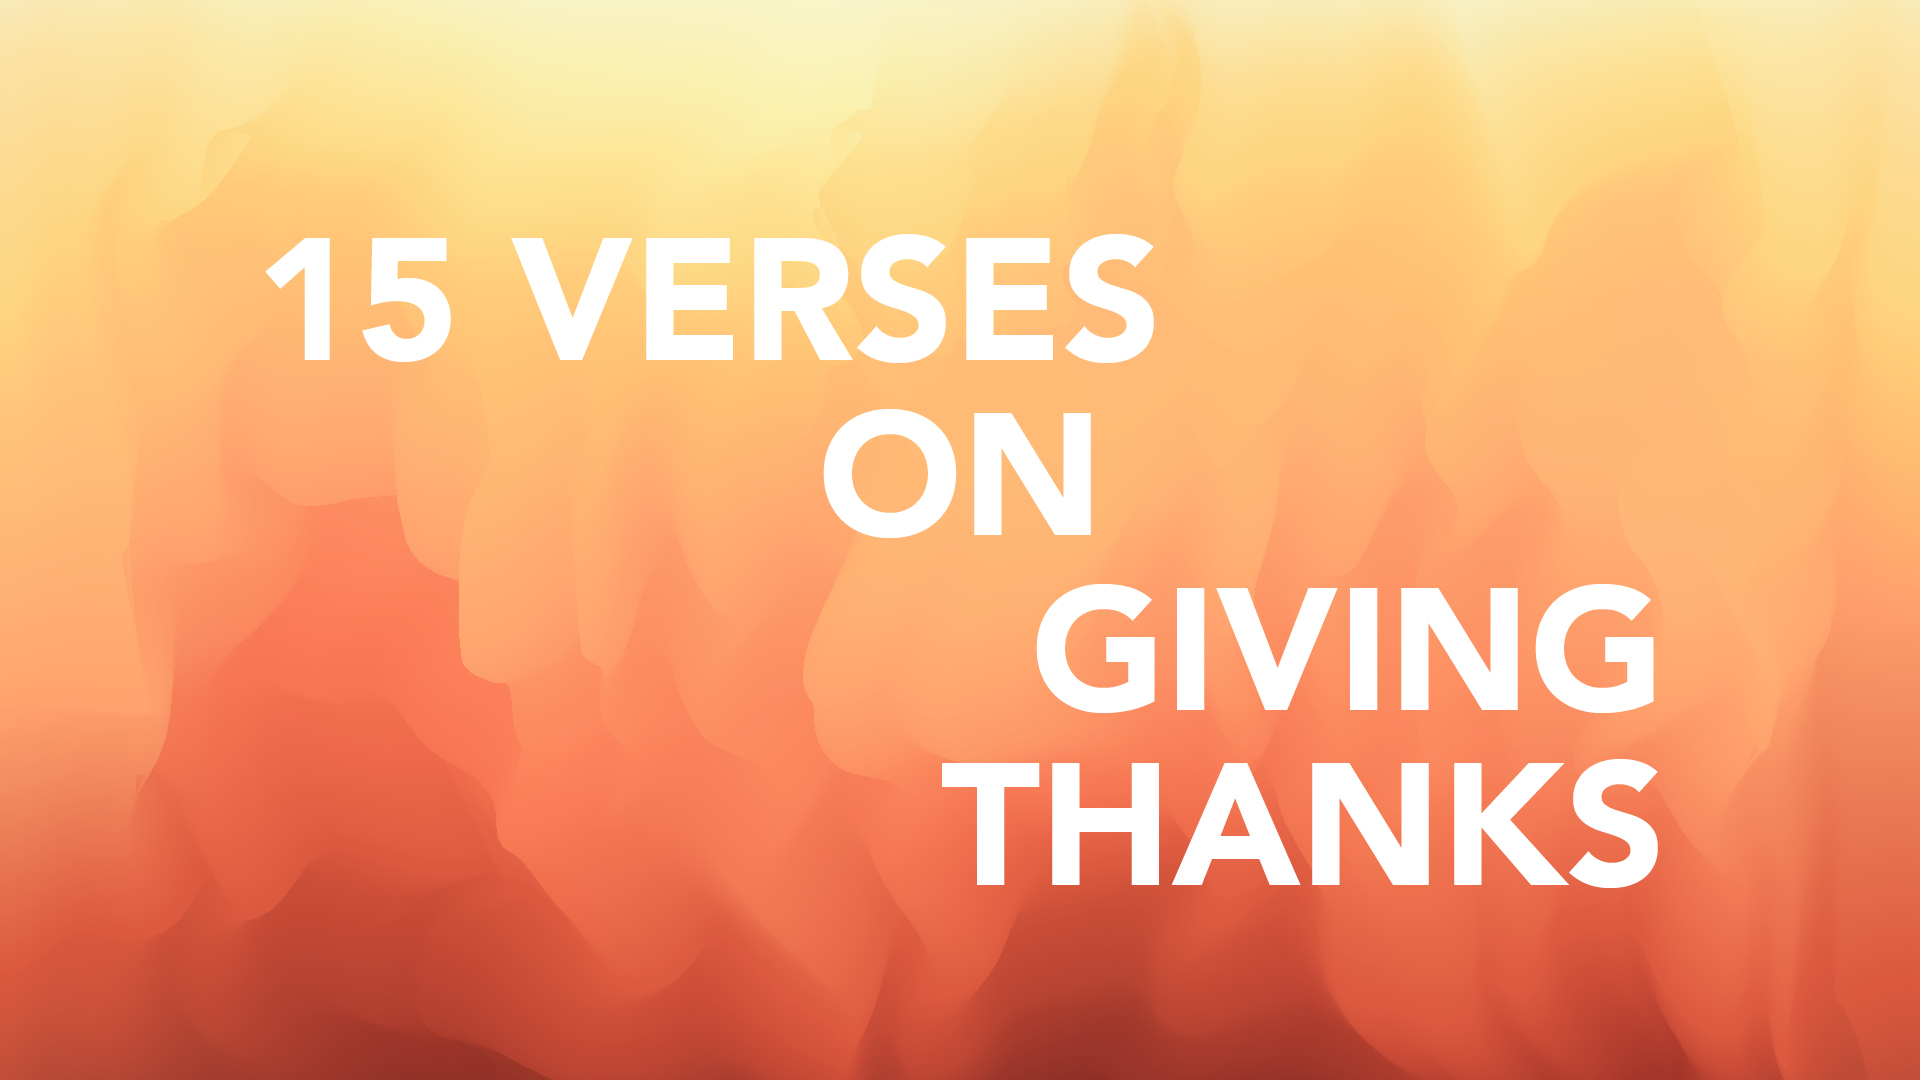 Giving Thanks: 15 Verses to Help Hero Image